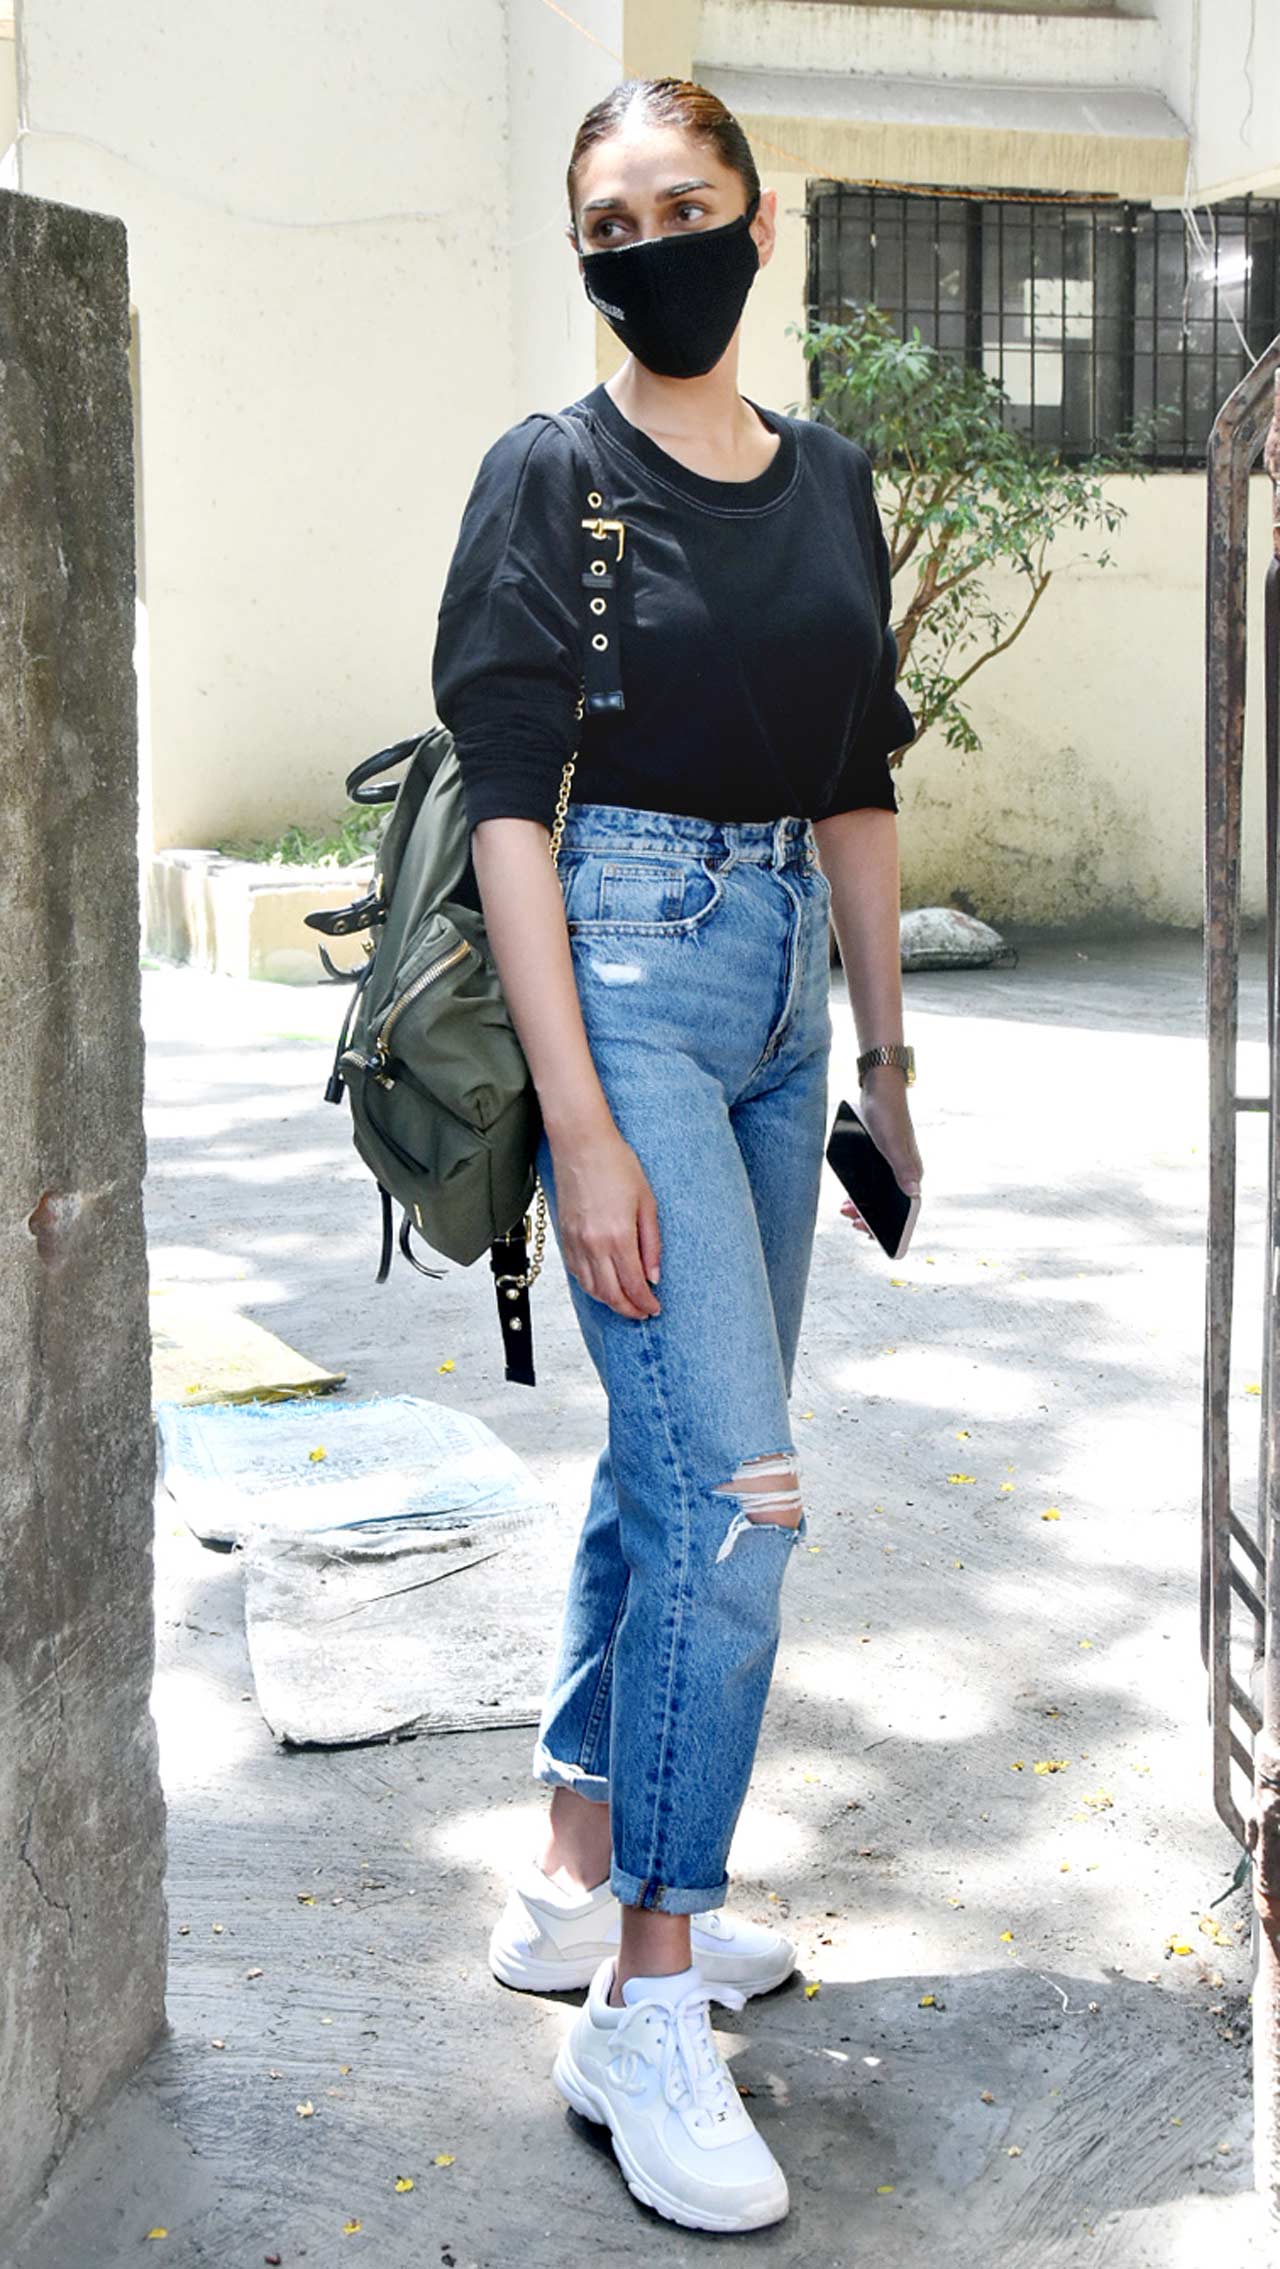 Aditi Rao Hydari was snapped at a salon in Juhu, Mumbai. The actress was seen wearing a black top, paired with distressed denim and white sneakers during the outing. On the professional front, Aditi was last seen in The Girl On The Train, also starring Parineeti Chopra and Kirti Kulhari. All pictures/Yogen Shah